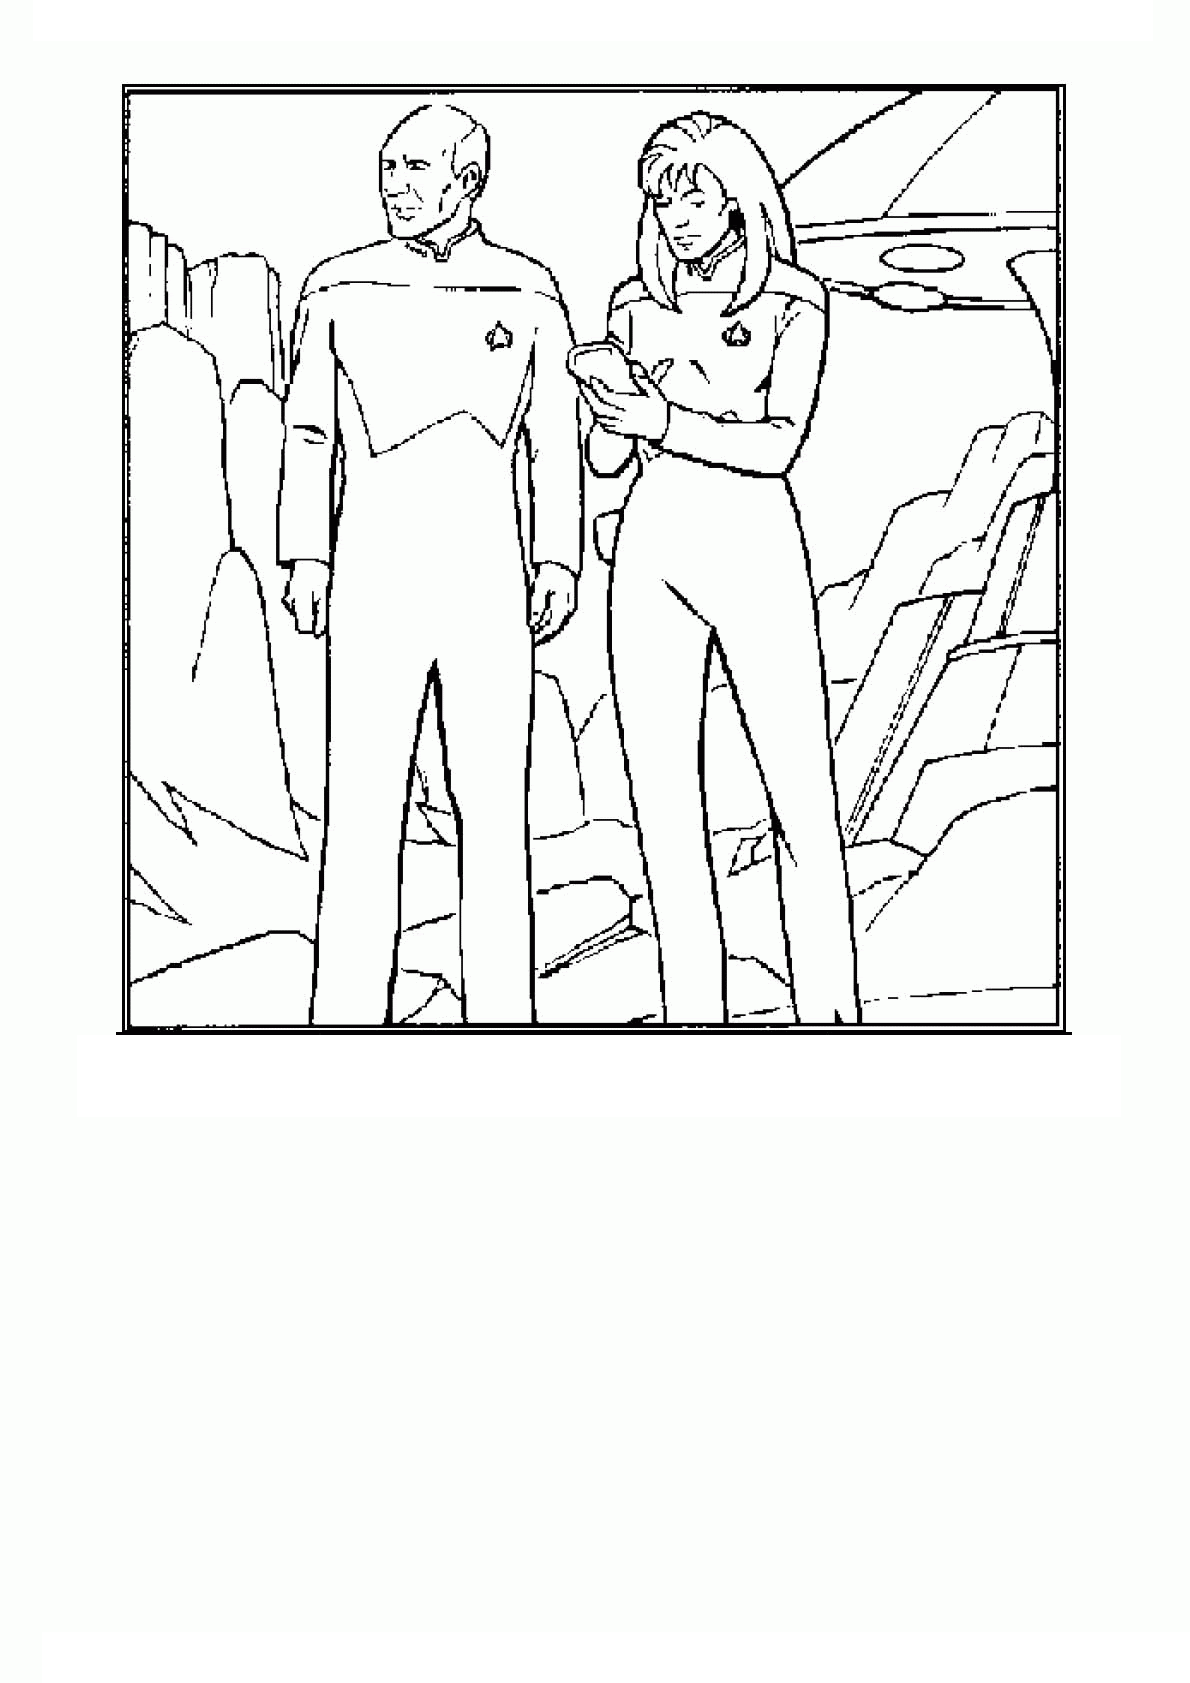 Star trek Coloring Pages